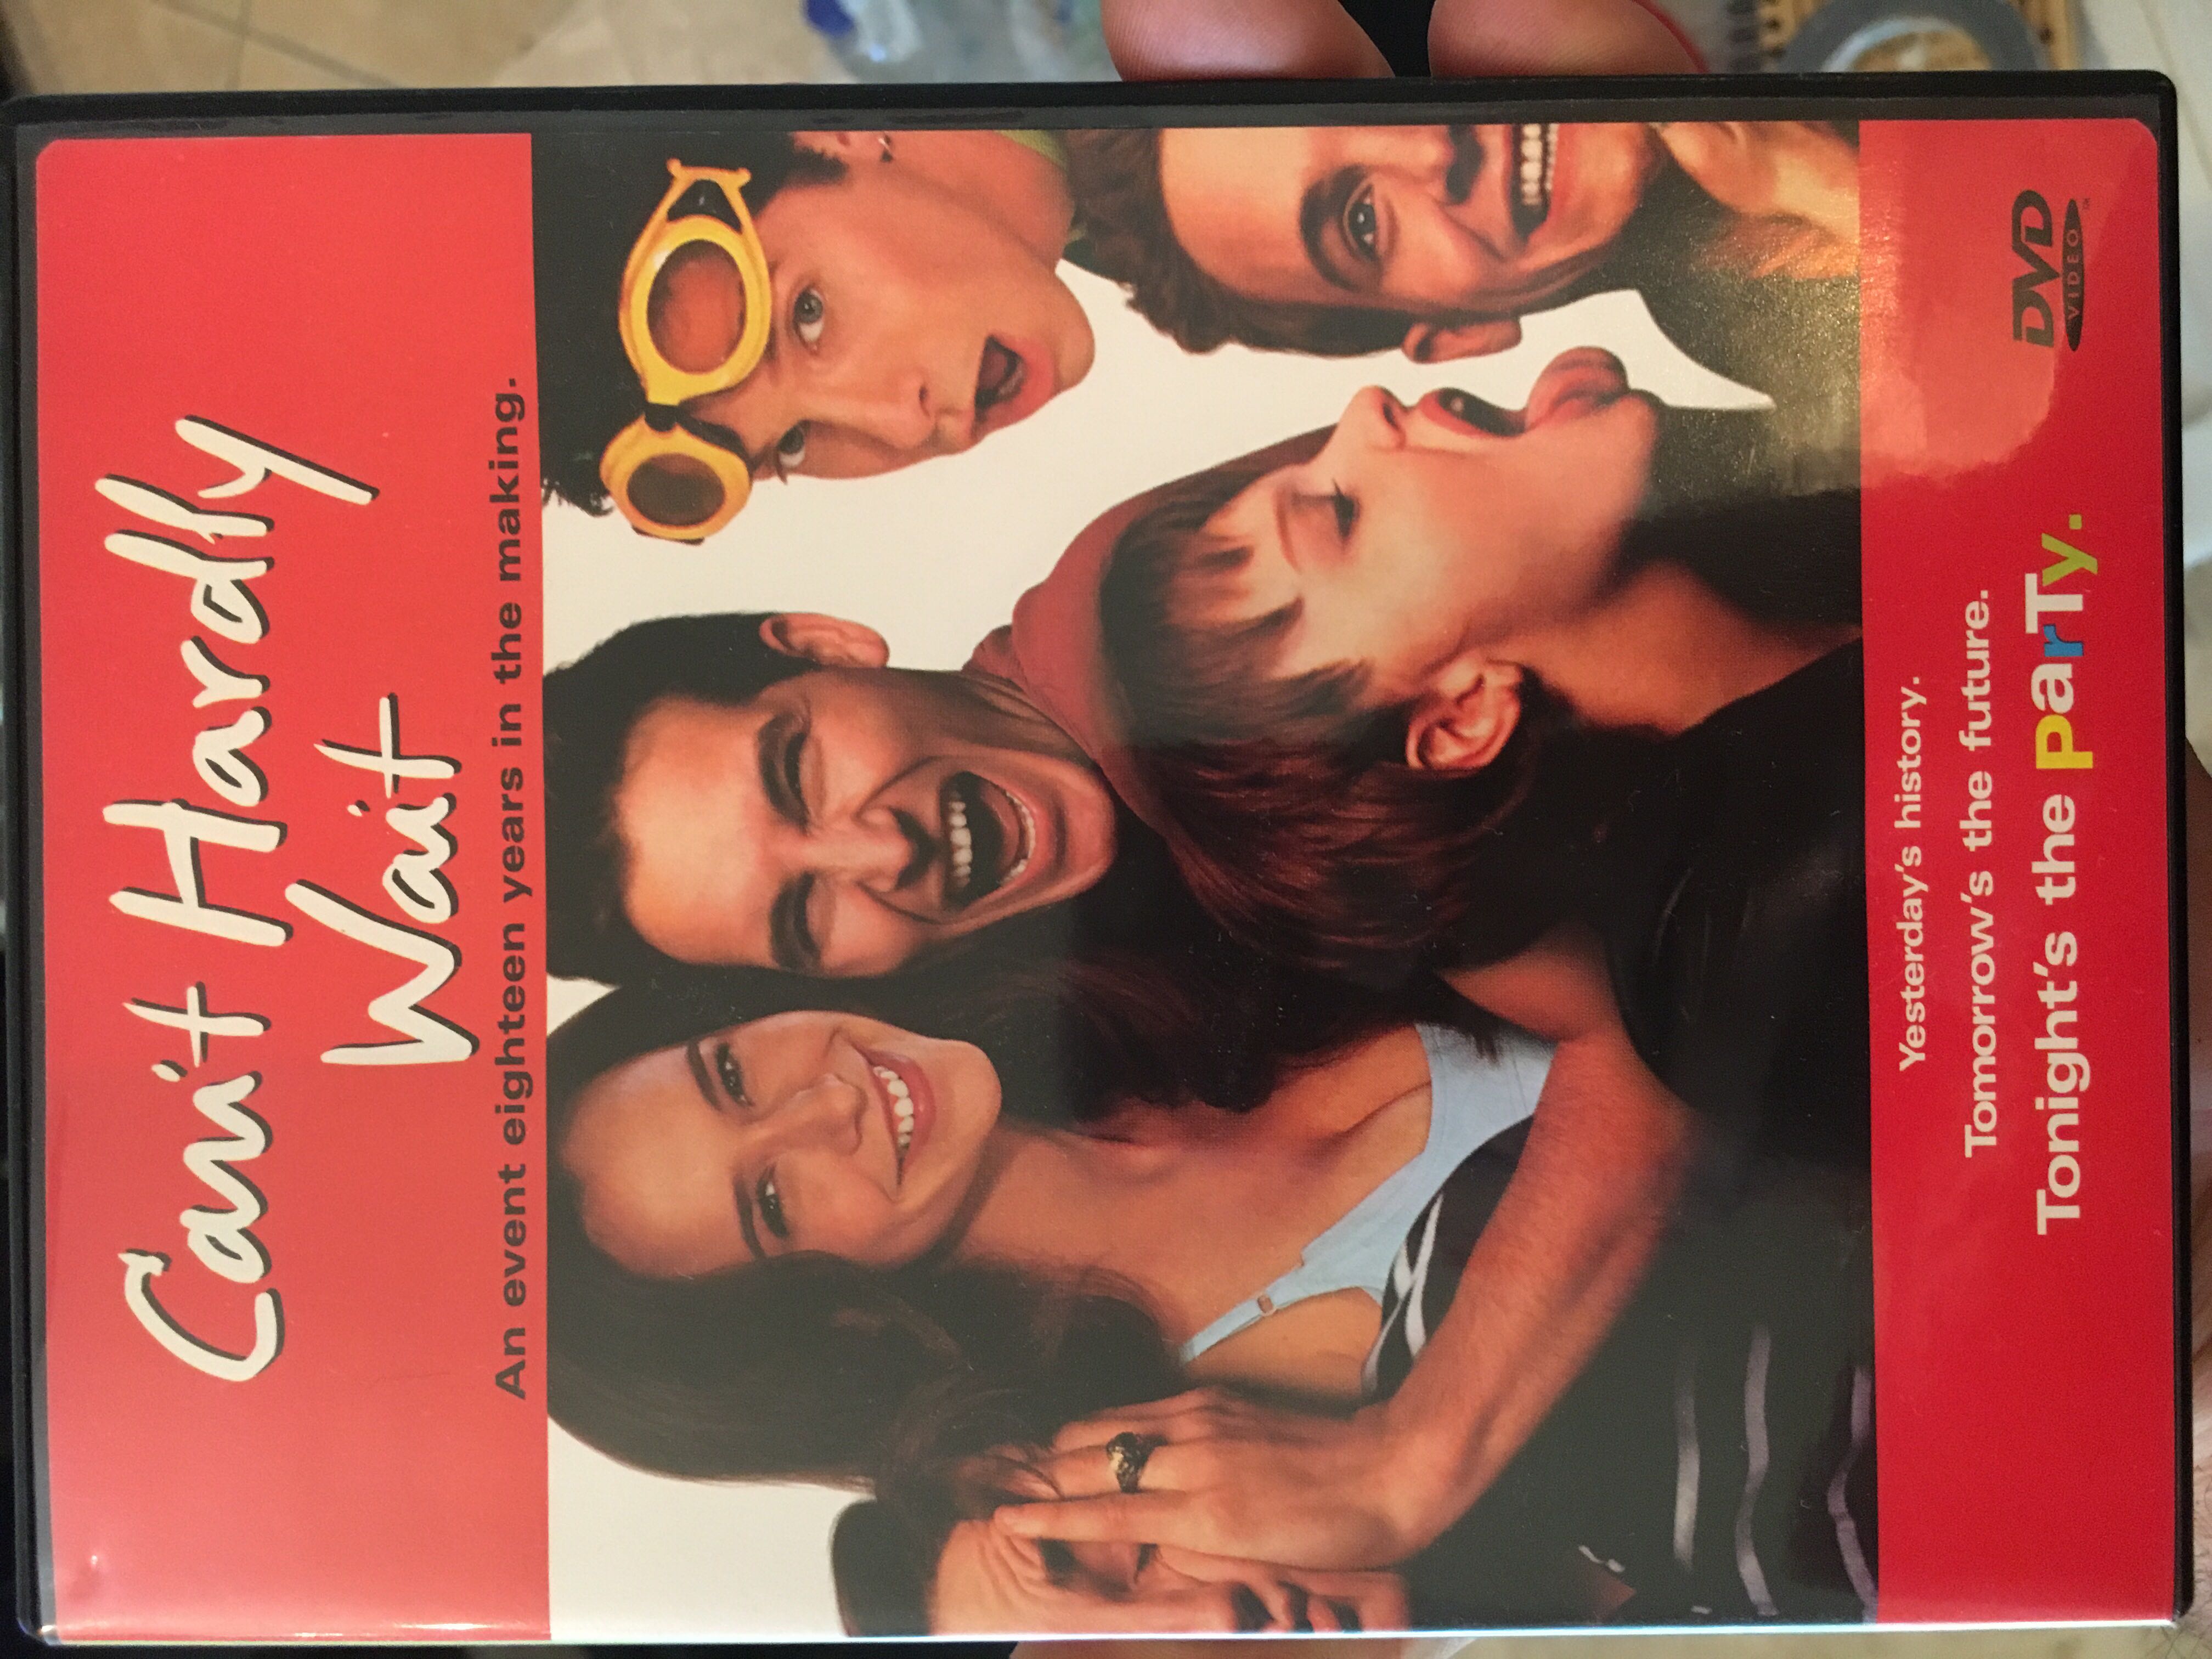 Can’t Hardly Wait DVD movie collectible [Barcode 043396027145] - Main Image 4